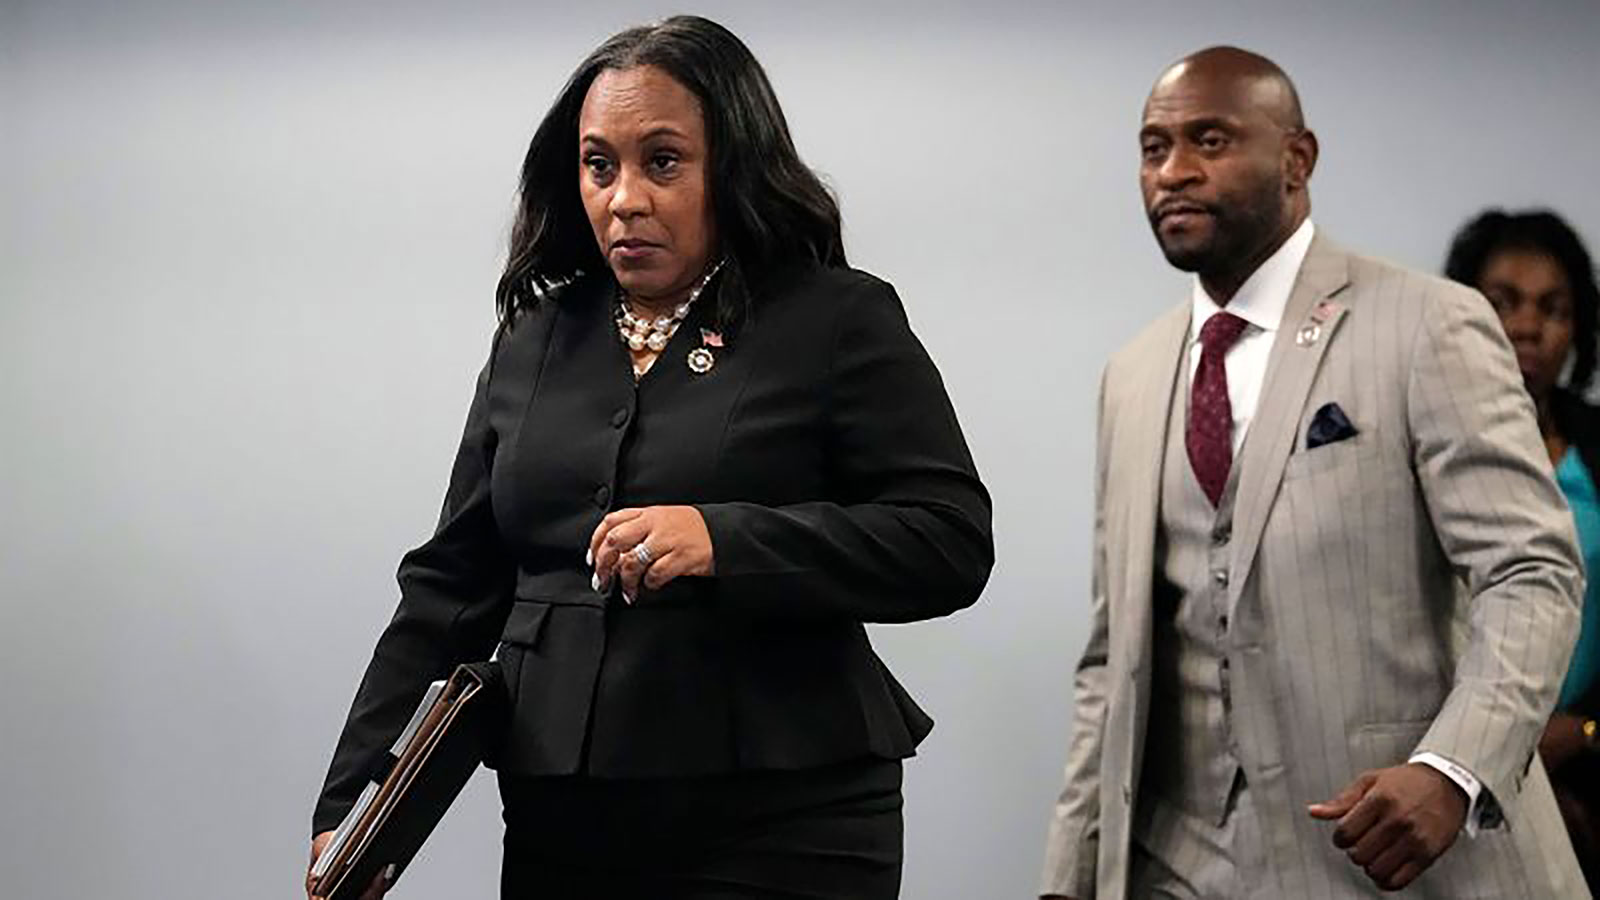 Fulton County District Attorney Fani Willis enteres a room in the Fulton County Government Center ahead of a news conference, Monday, August 14, in Atlanta. 